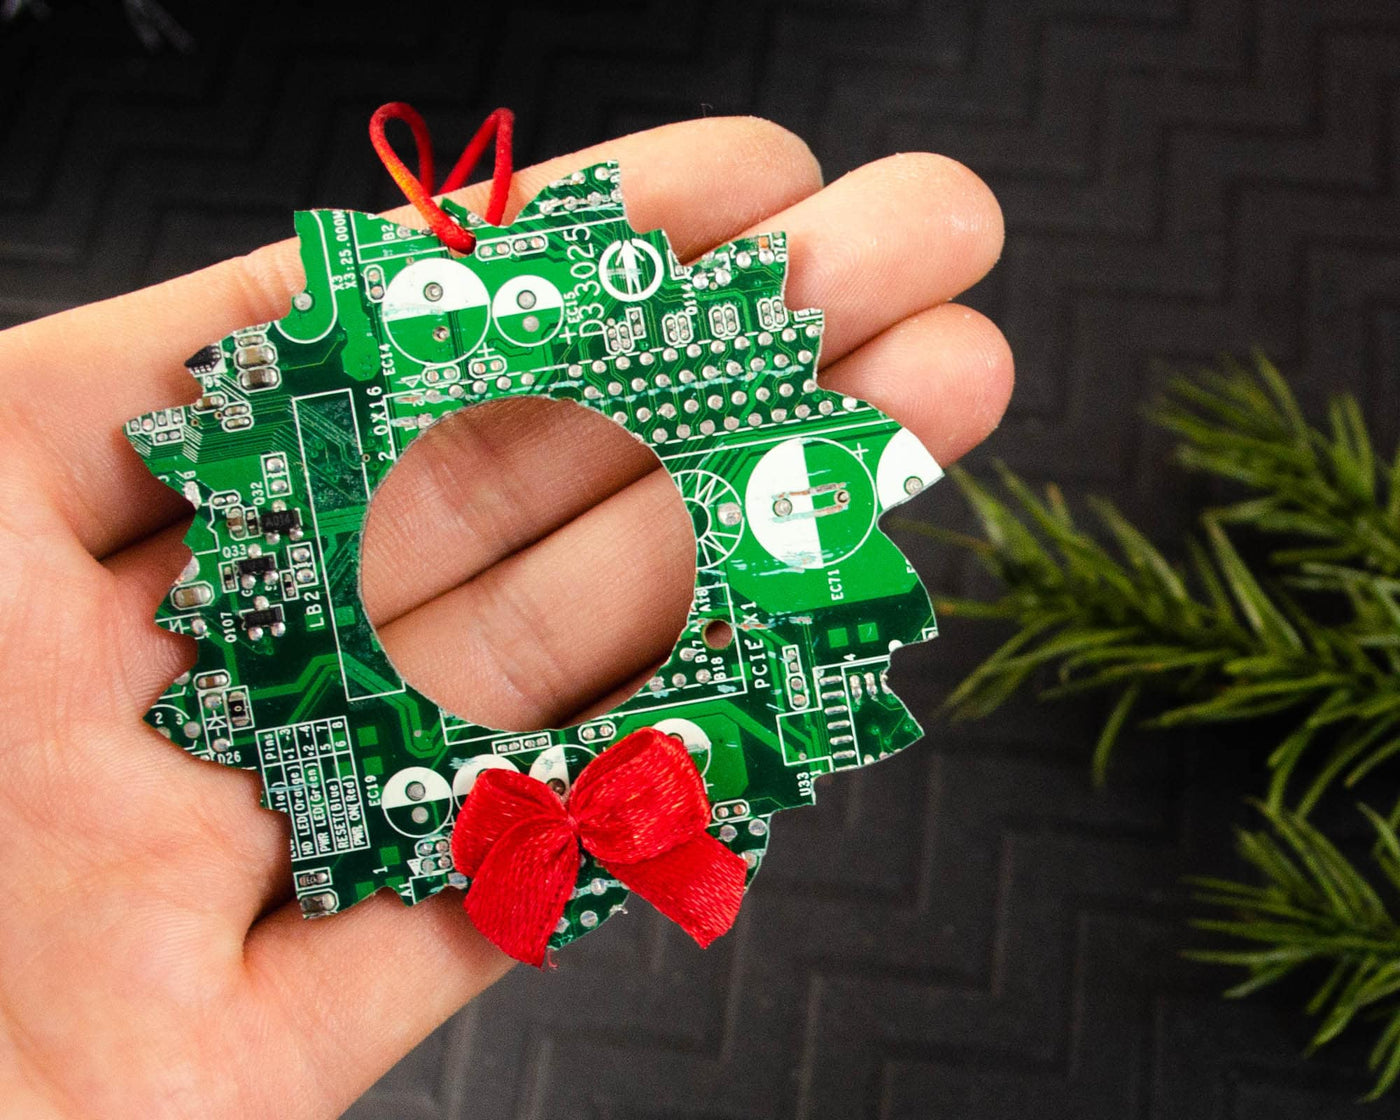 Circuit Board Wreath Ornament, Geeky Christmas Ornament, Holiday Geek Decor, Computer Programmer Gift, Computer Science Ornament